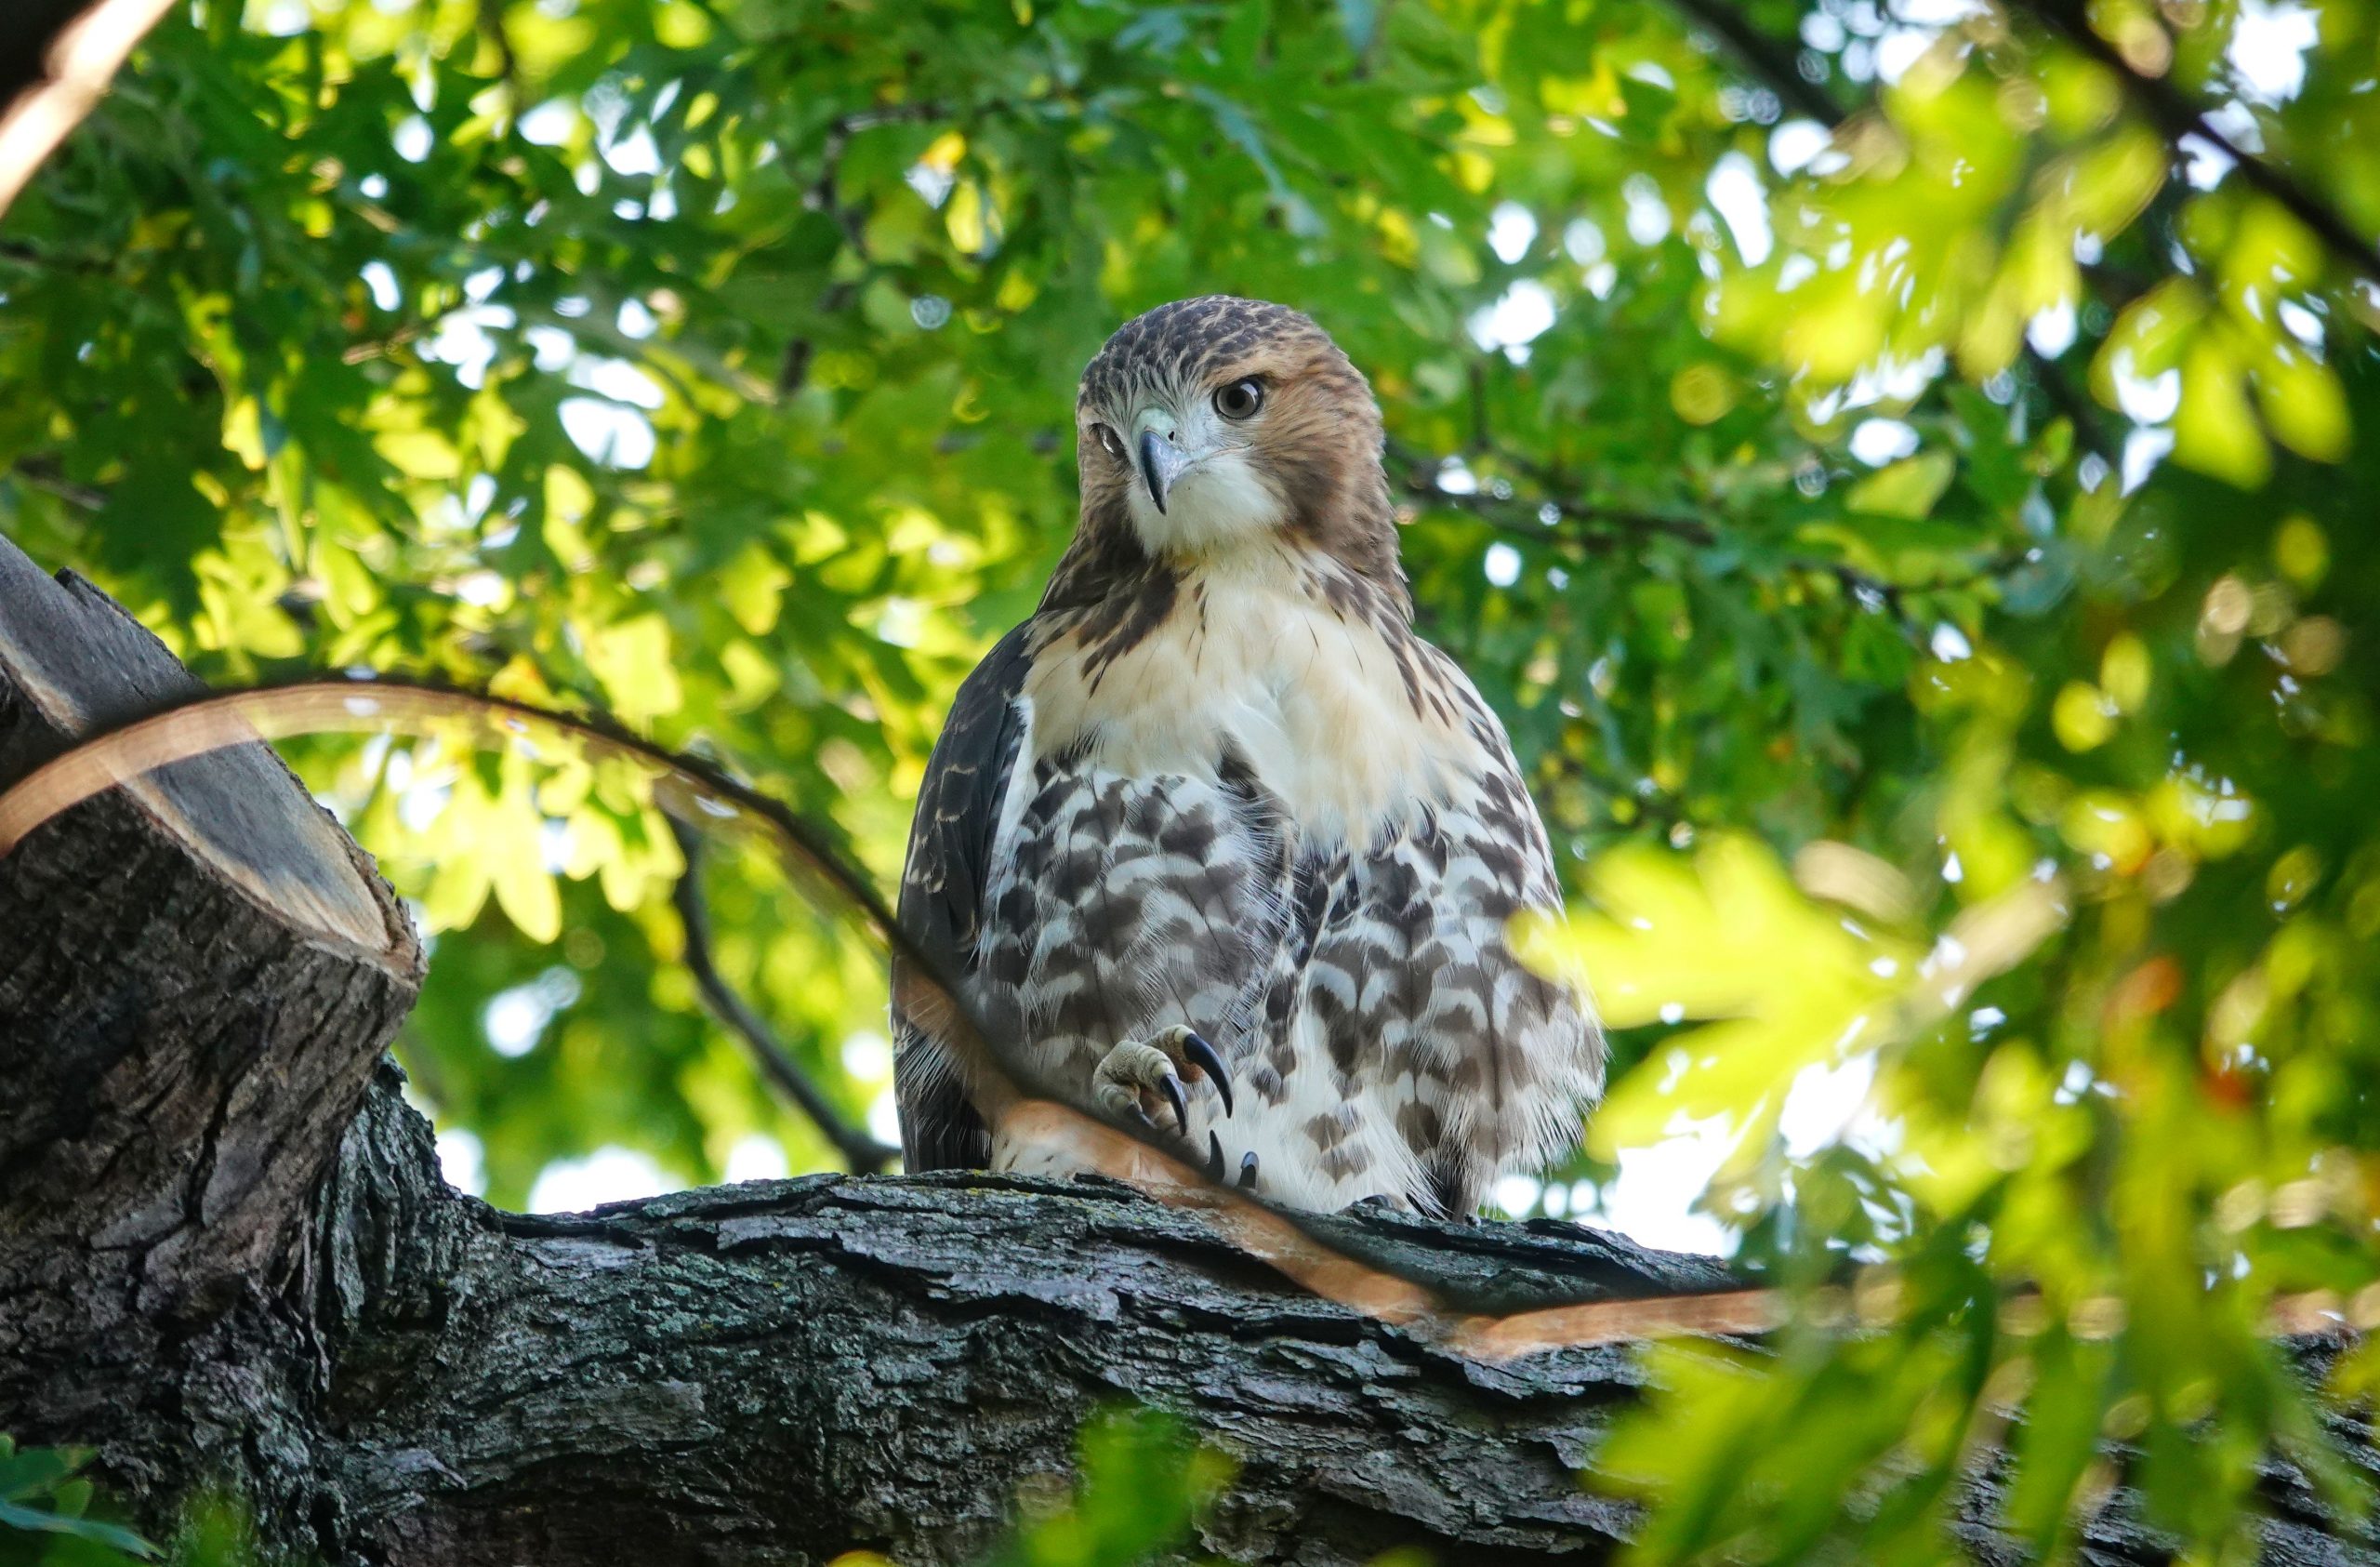 An adult hawk sits on a tree branch on a sunny day, surrounded by green leaves